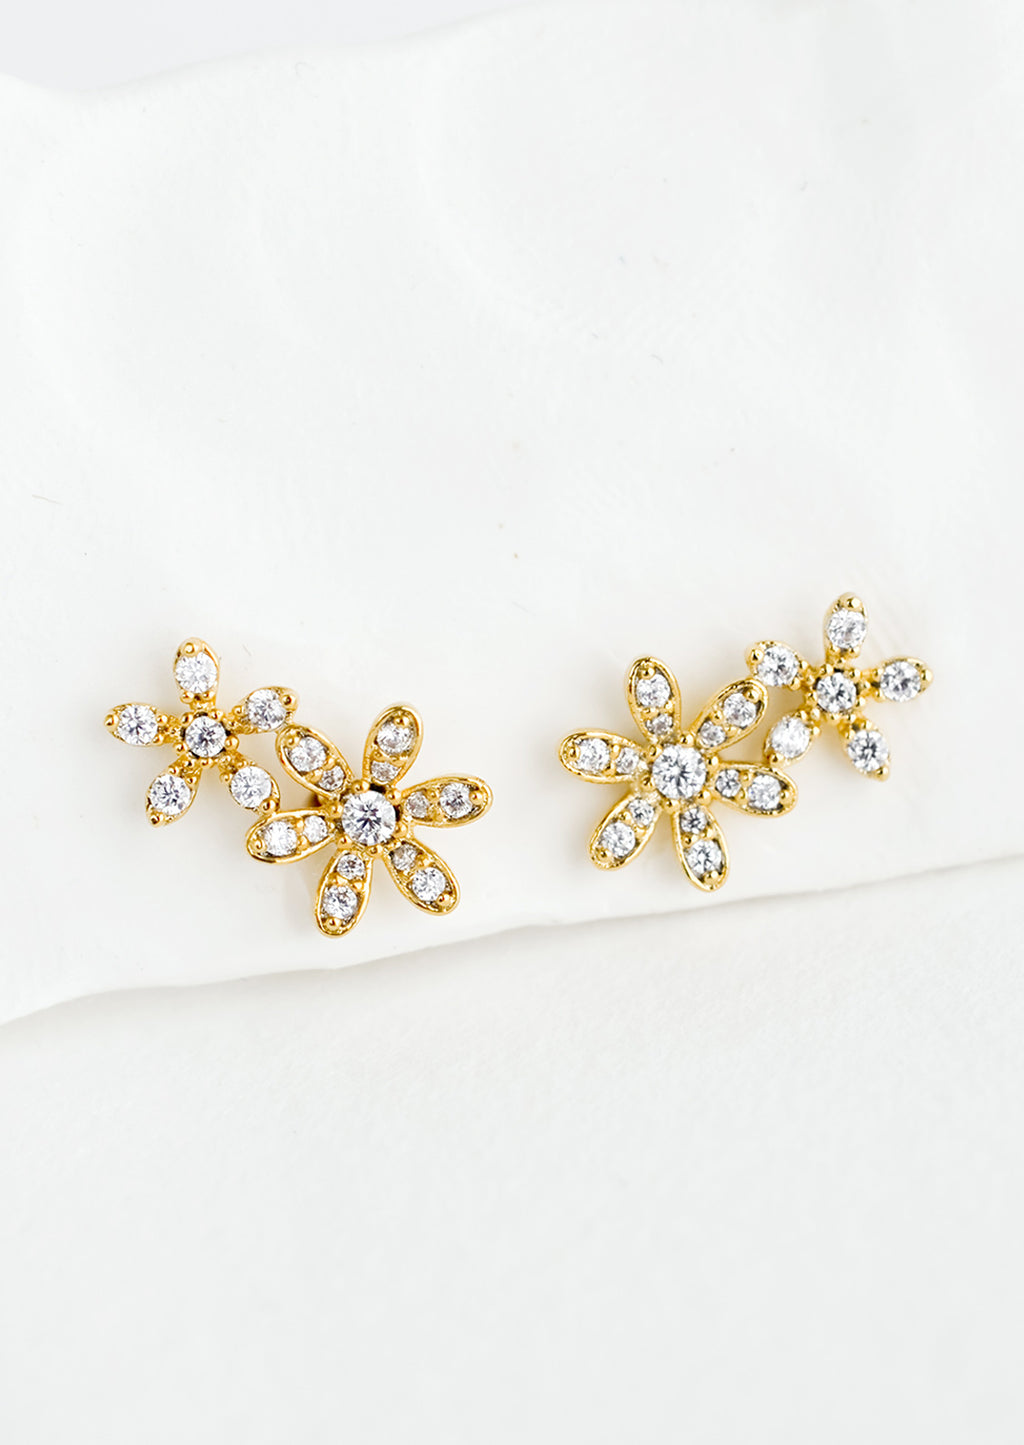 1: A pair of gold stud earrings in a two flower silhouette with clear crystal detailing.